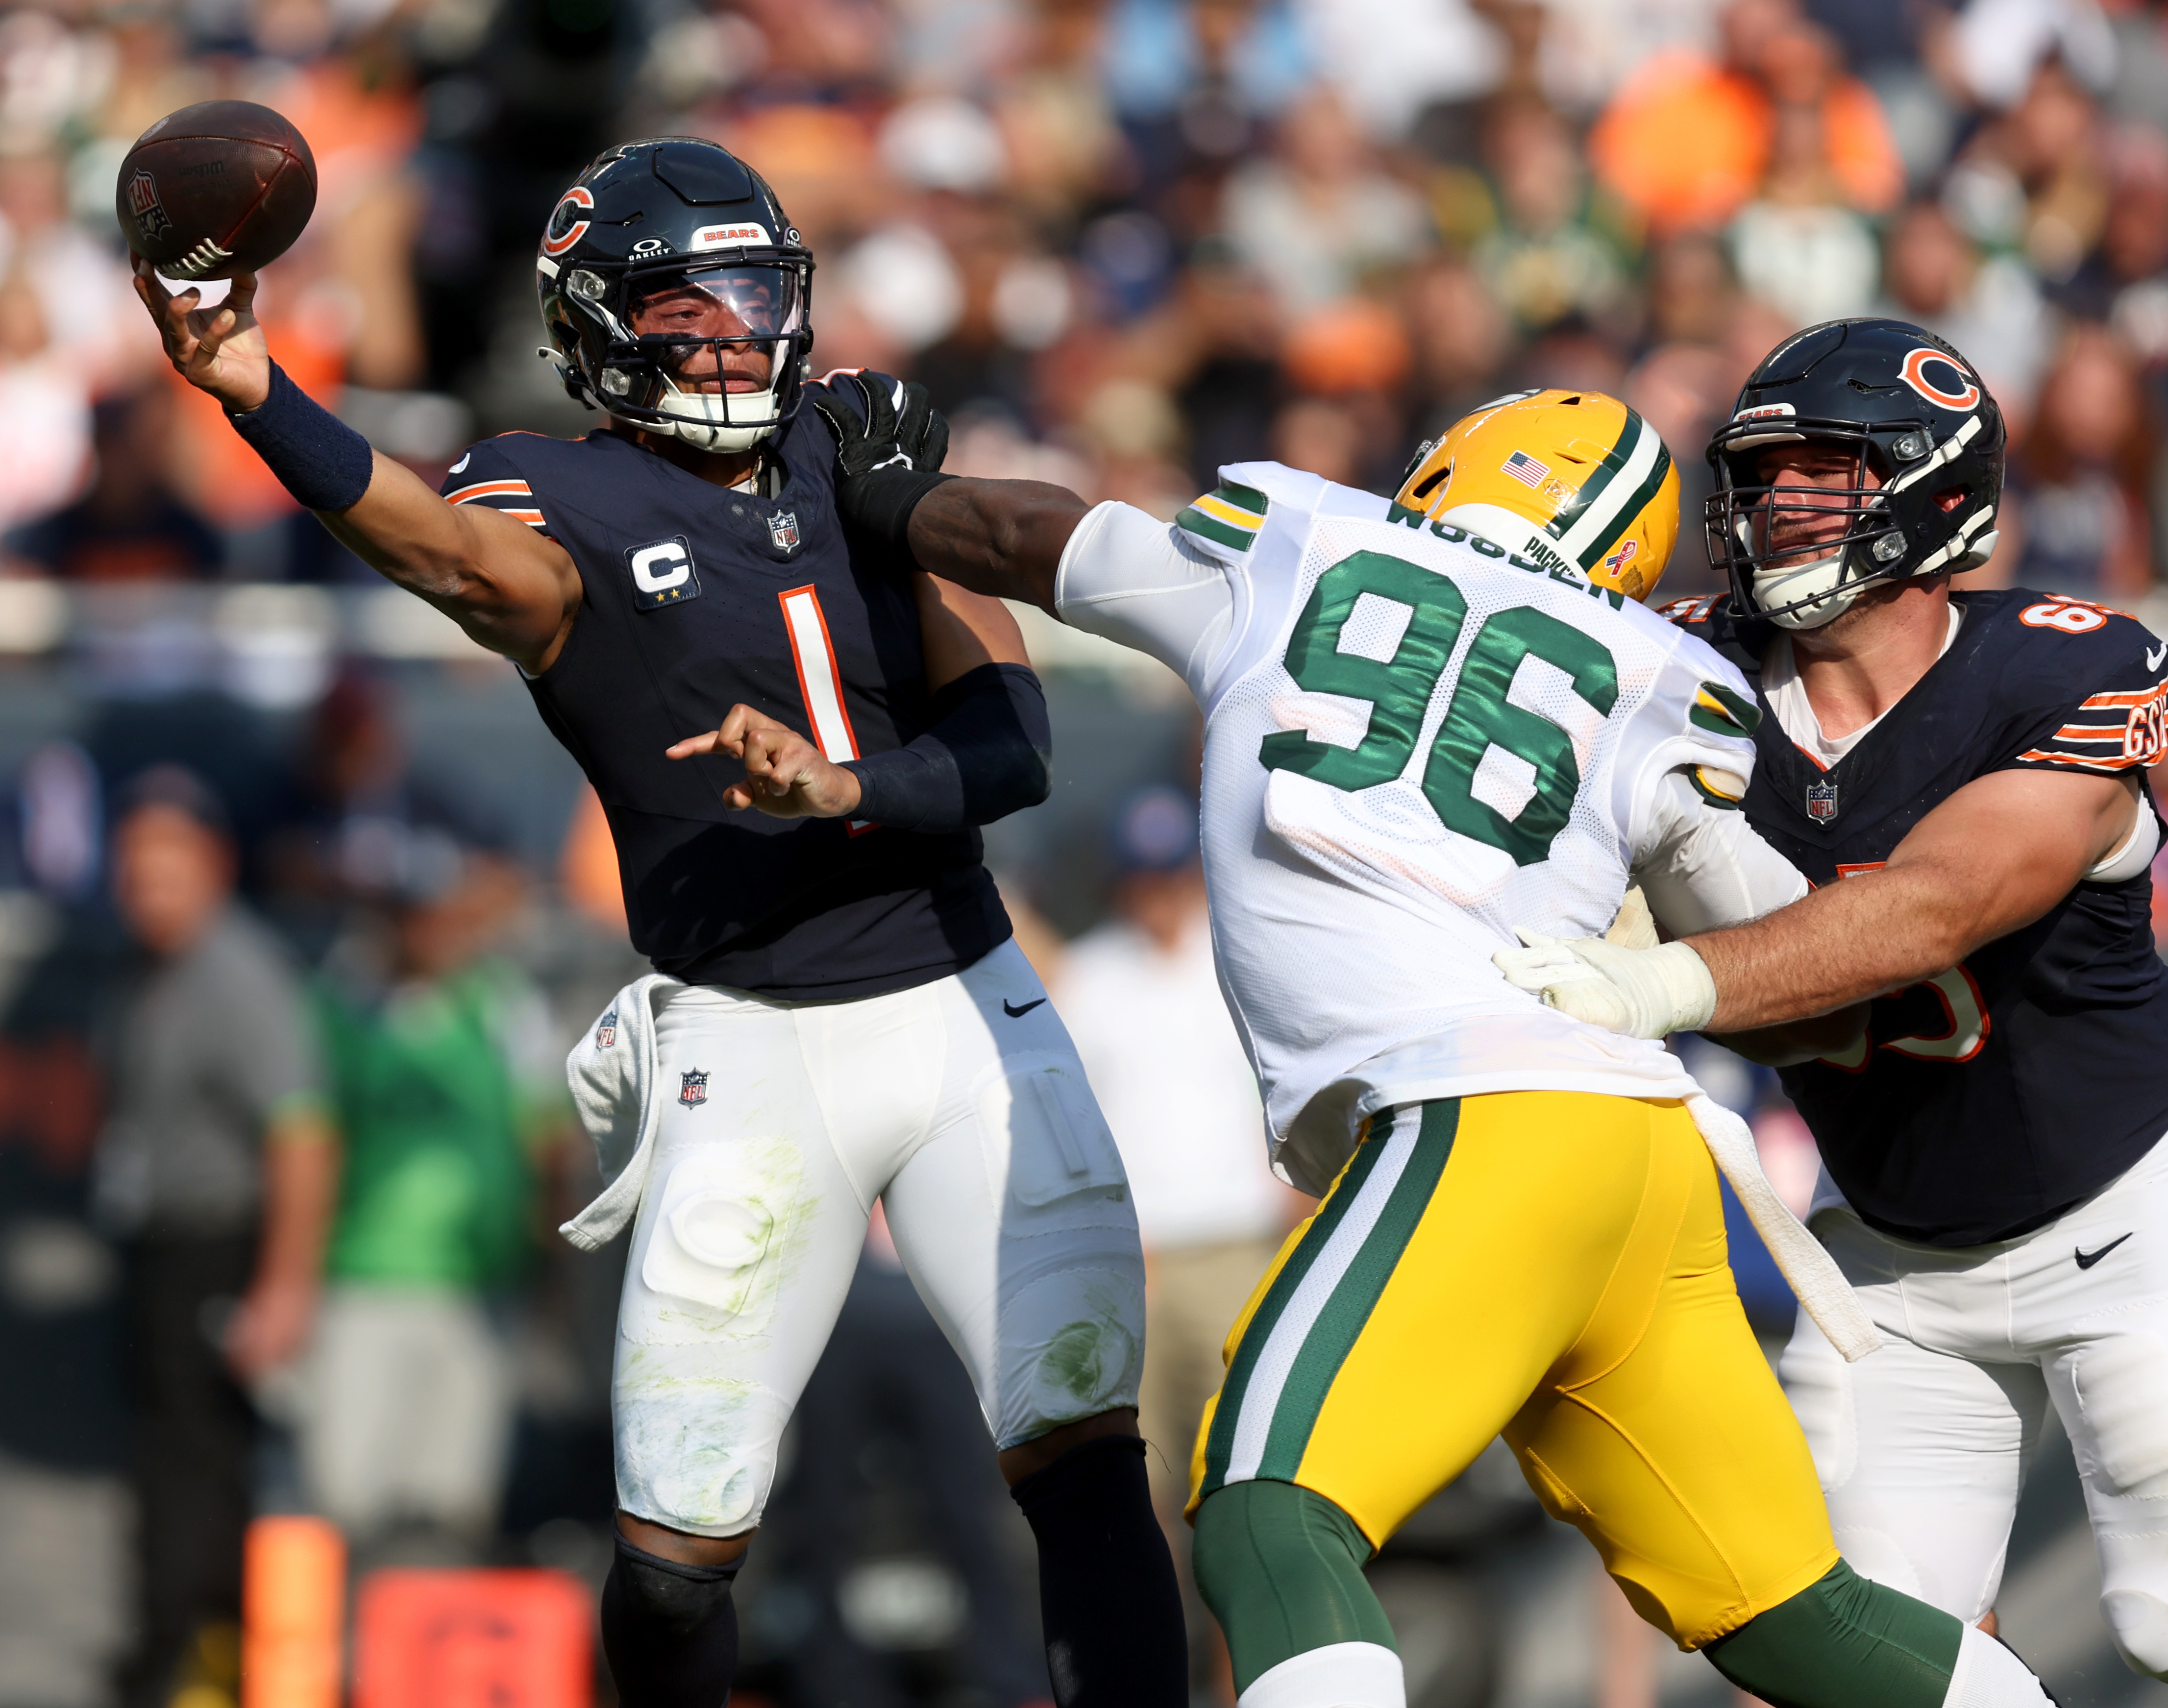 Chicago Bears rally to defeat San Francisco 49ers 19-10 in season